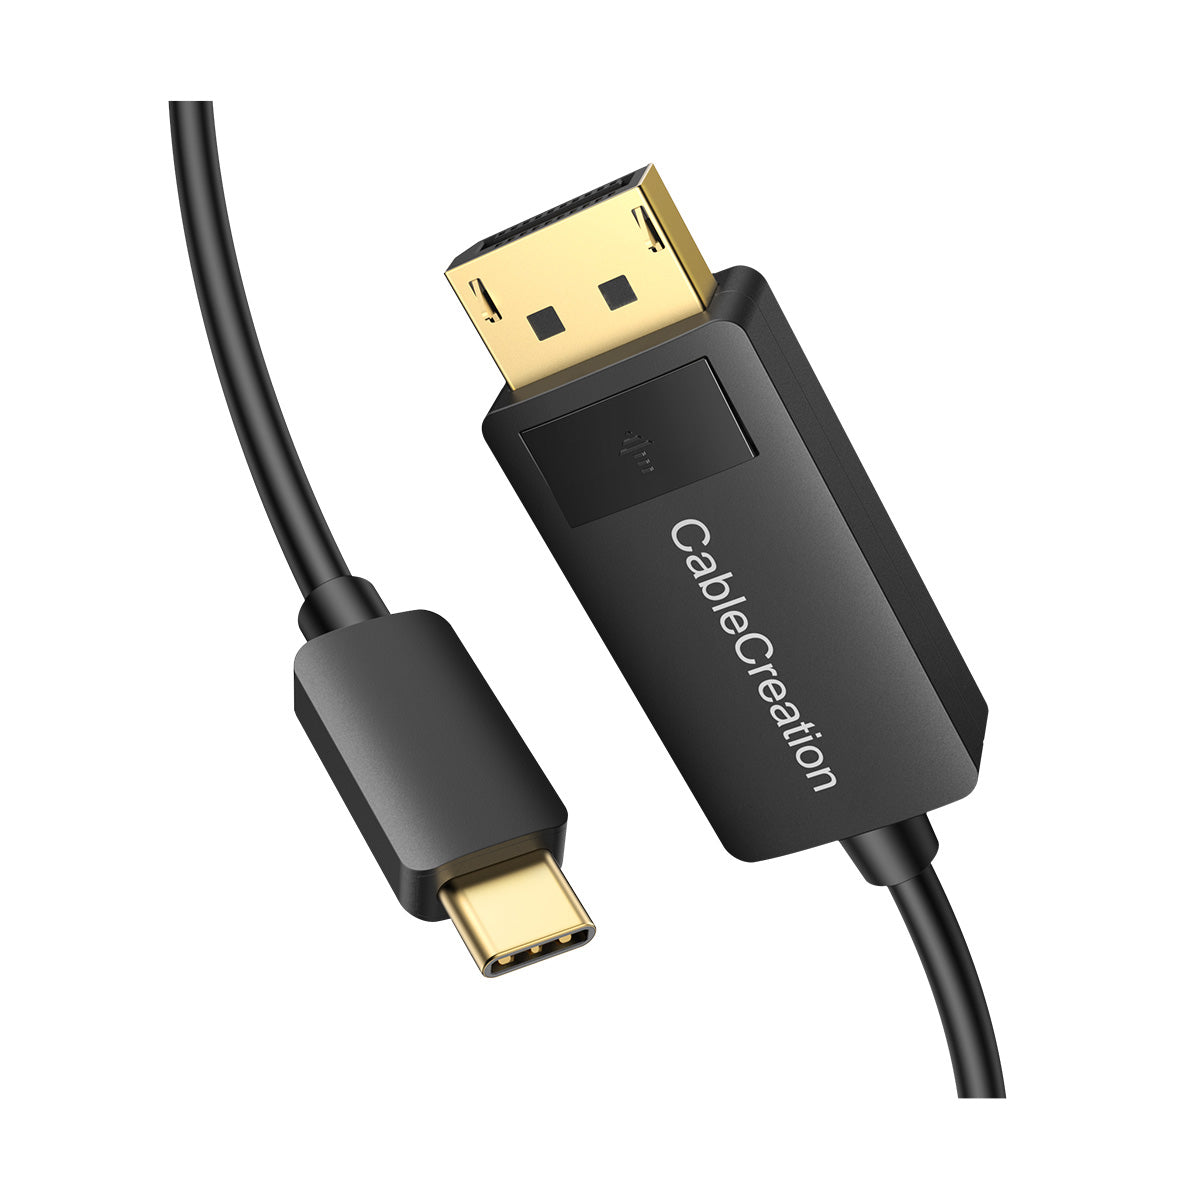 USB-C to DisplayPort Cable - USB C to DP Adapter - Active Cable